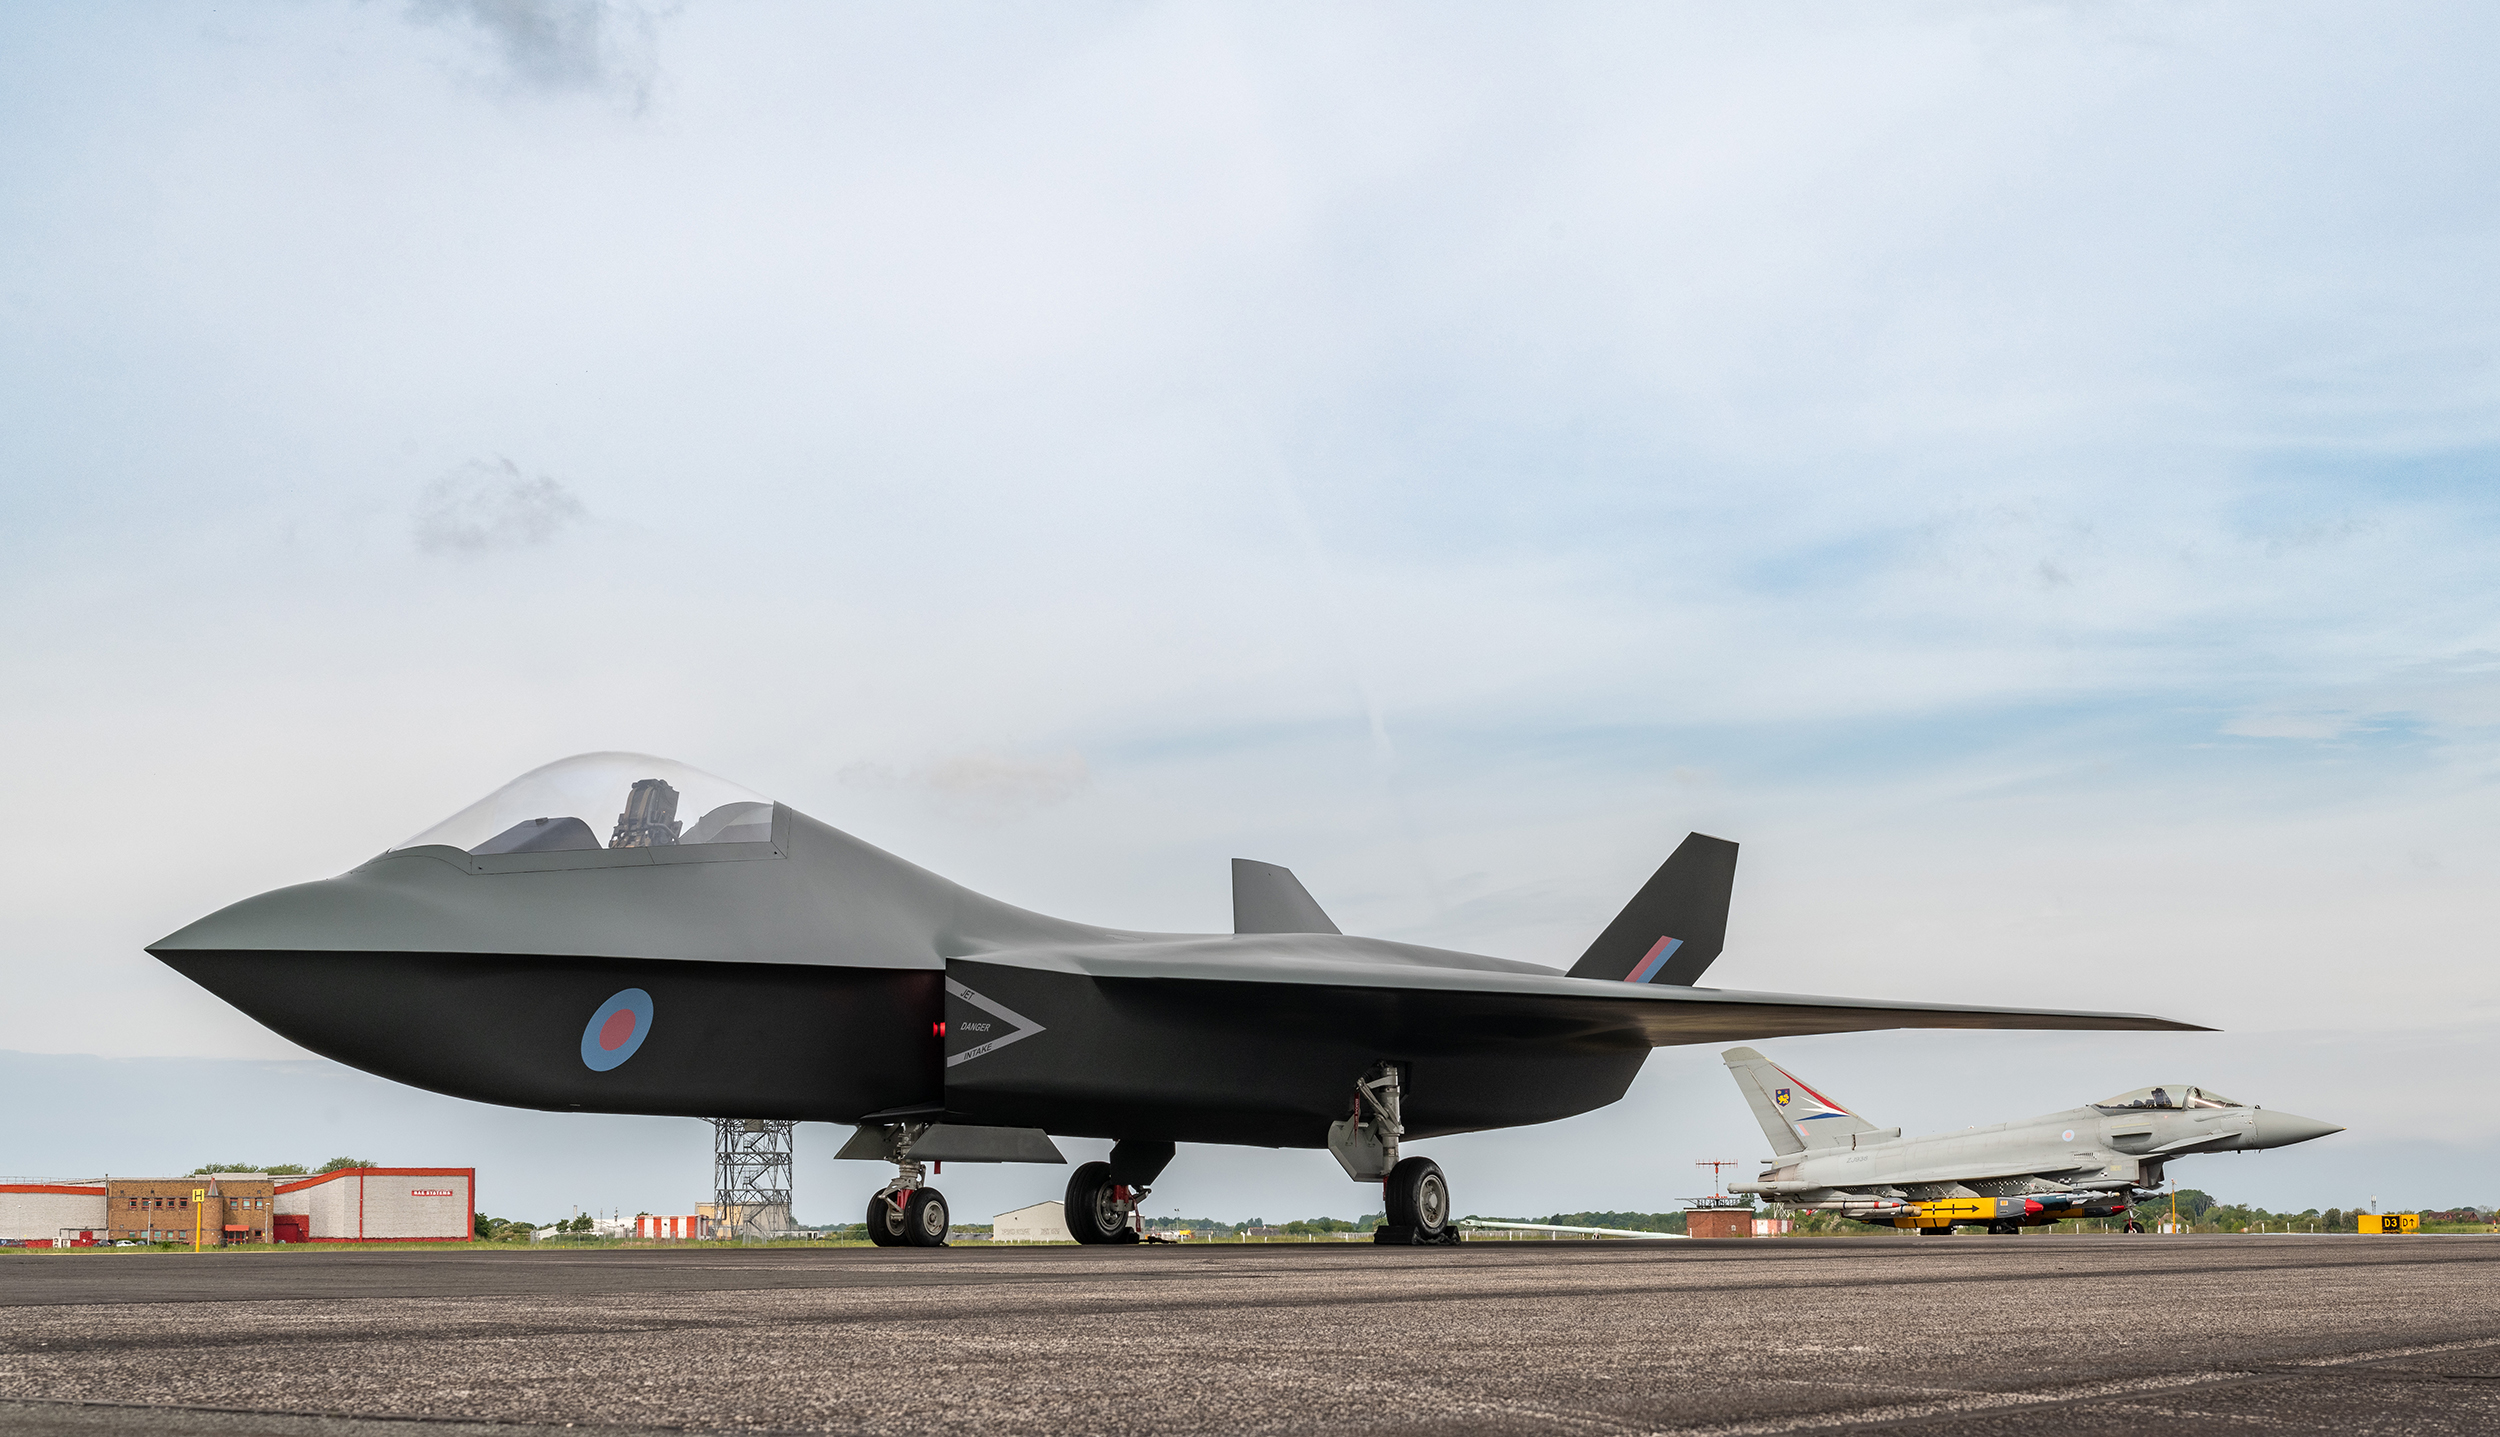 Artist impression of Tempest aircraft at BAE Warton site